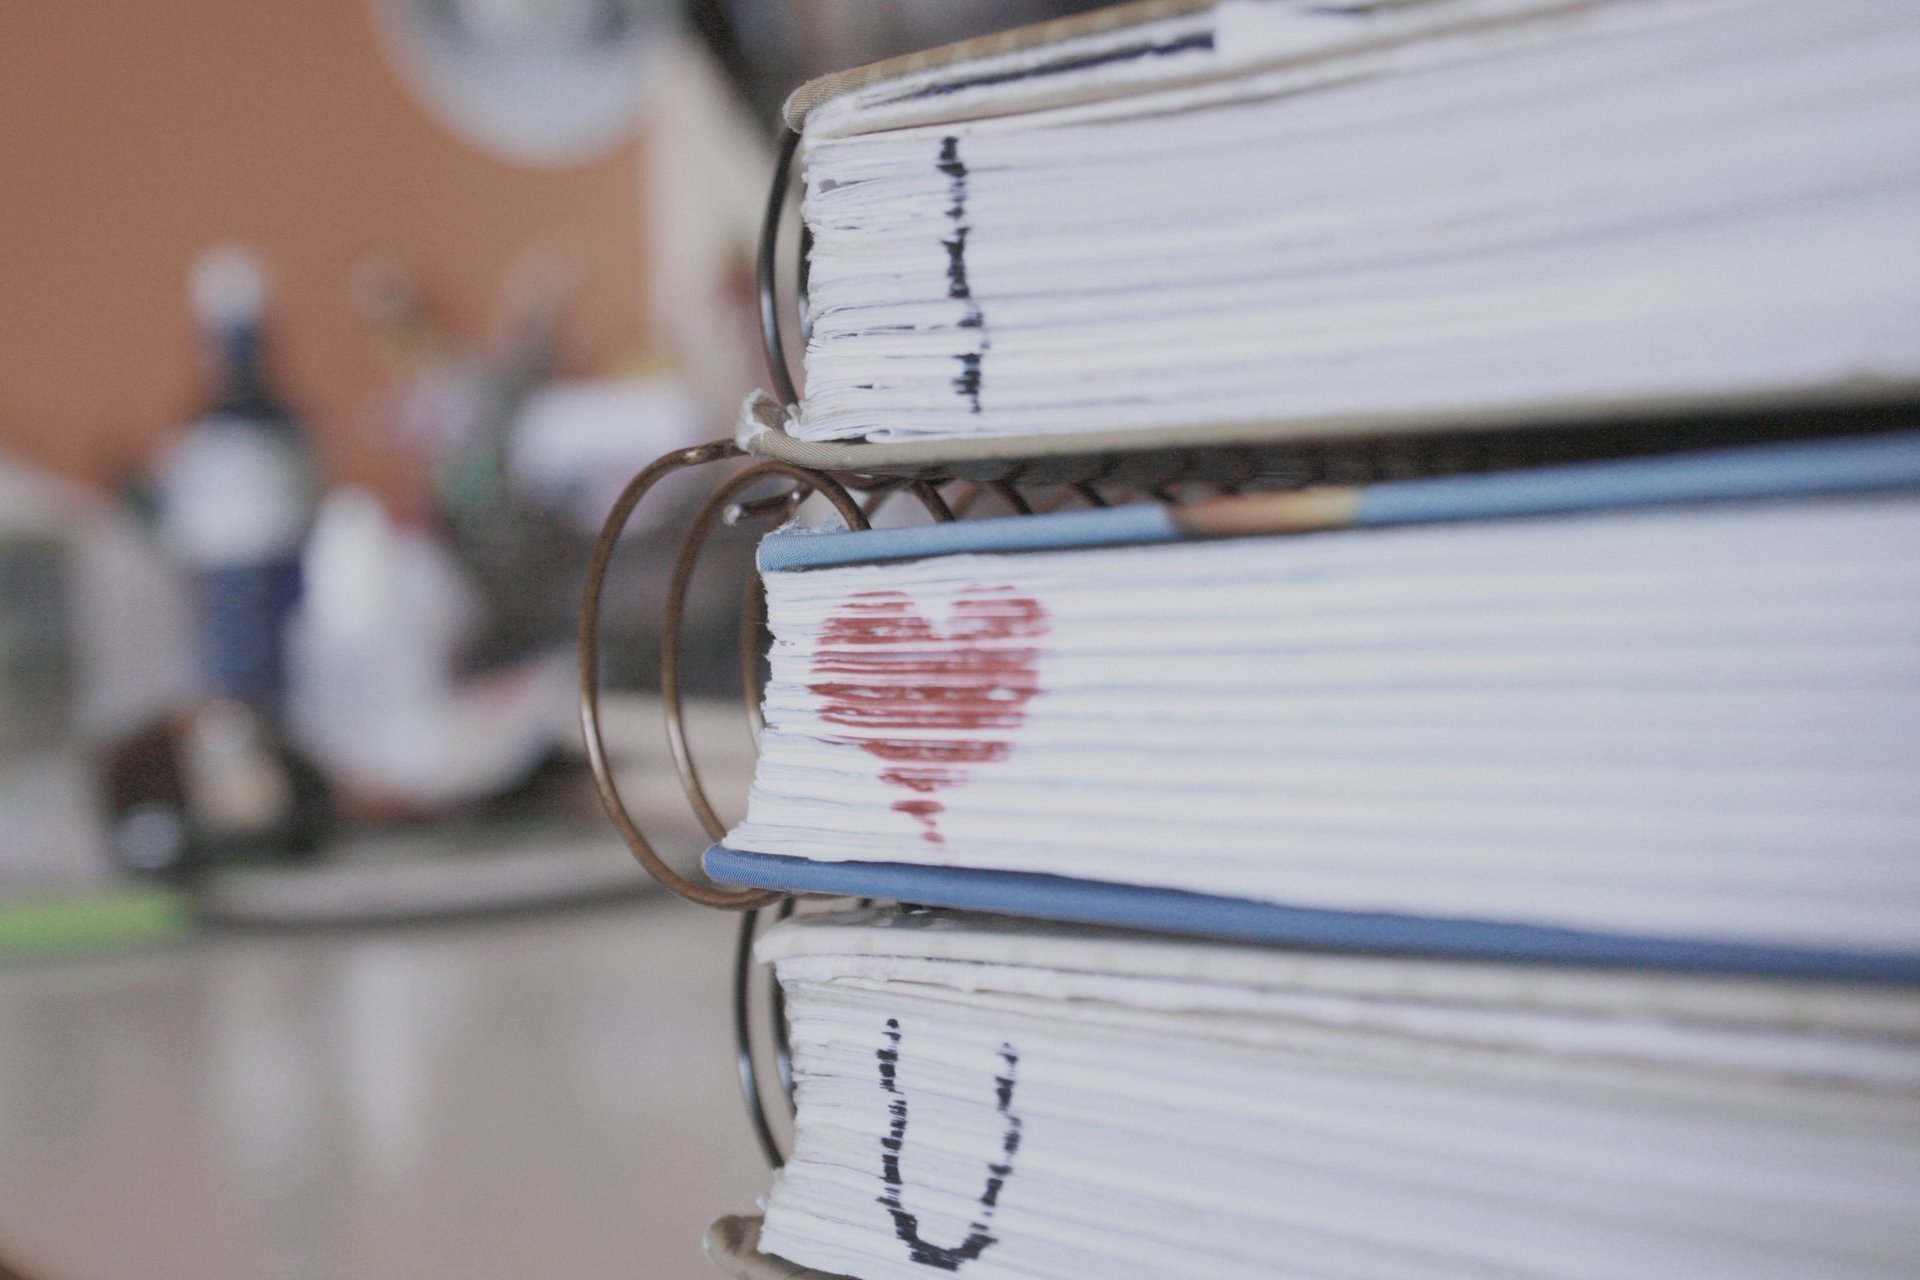 A stack of books marked with a sign of love